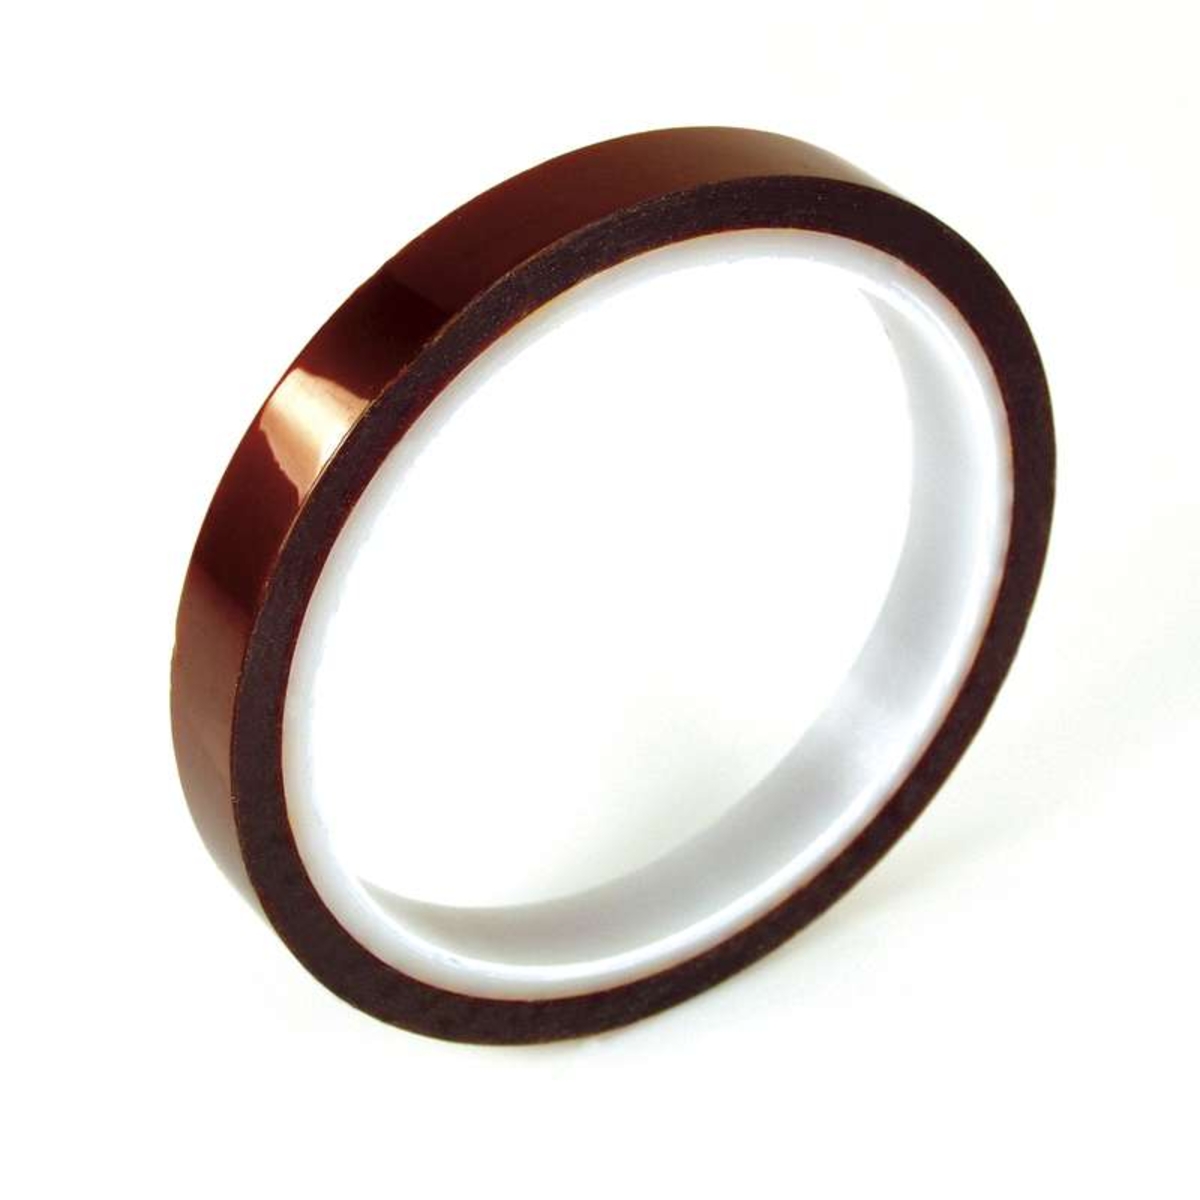 Polyimide Electrical Tape (Kapton Tape) - 25mm x 30 Meters